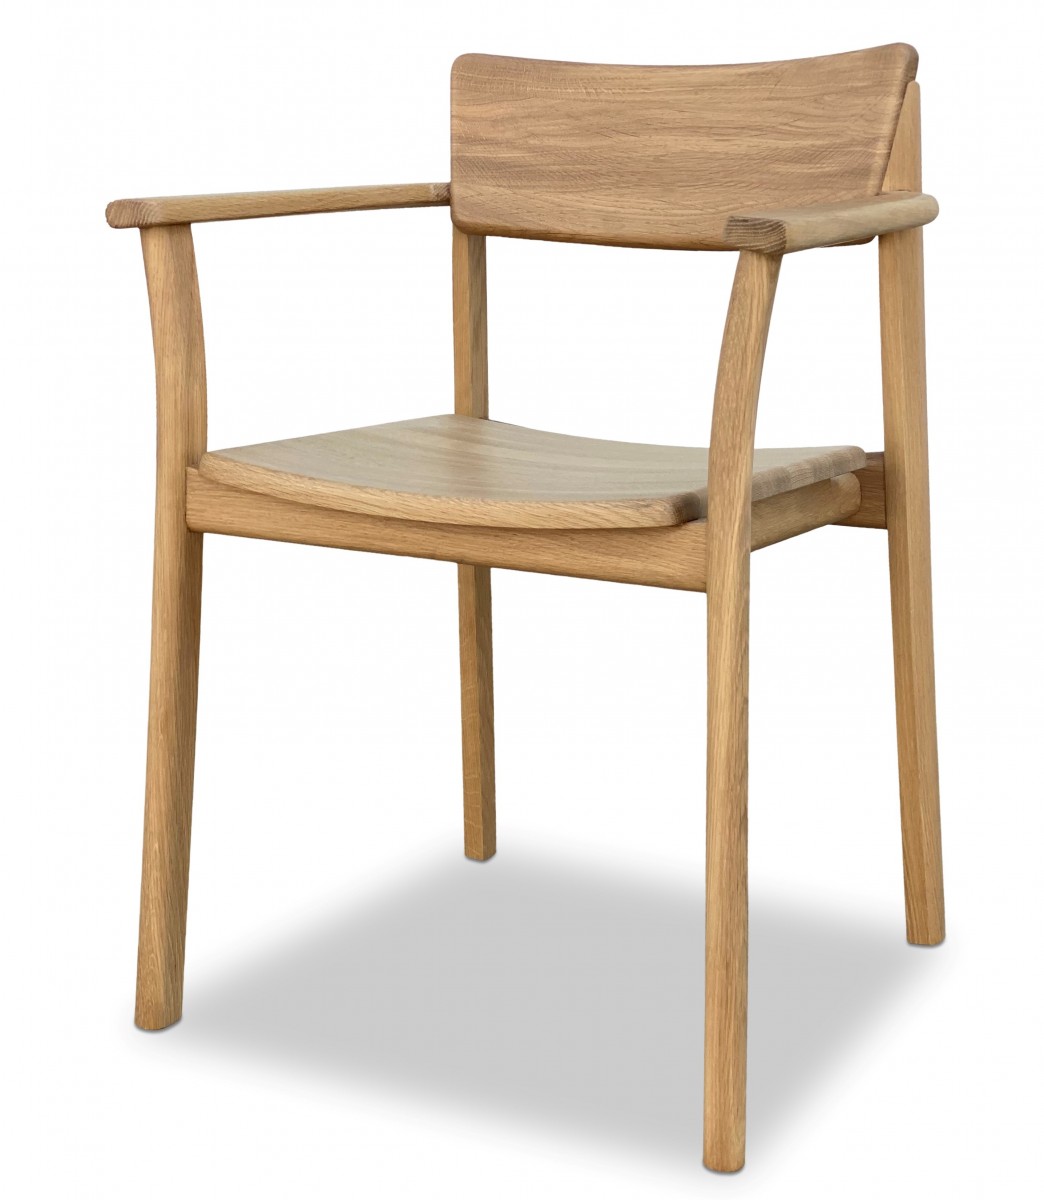 Poise Armchair - Wooden Seat | Highlight image